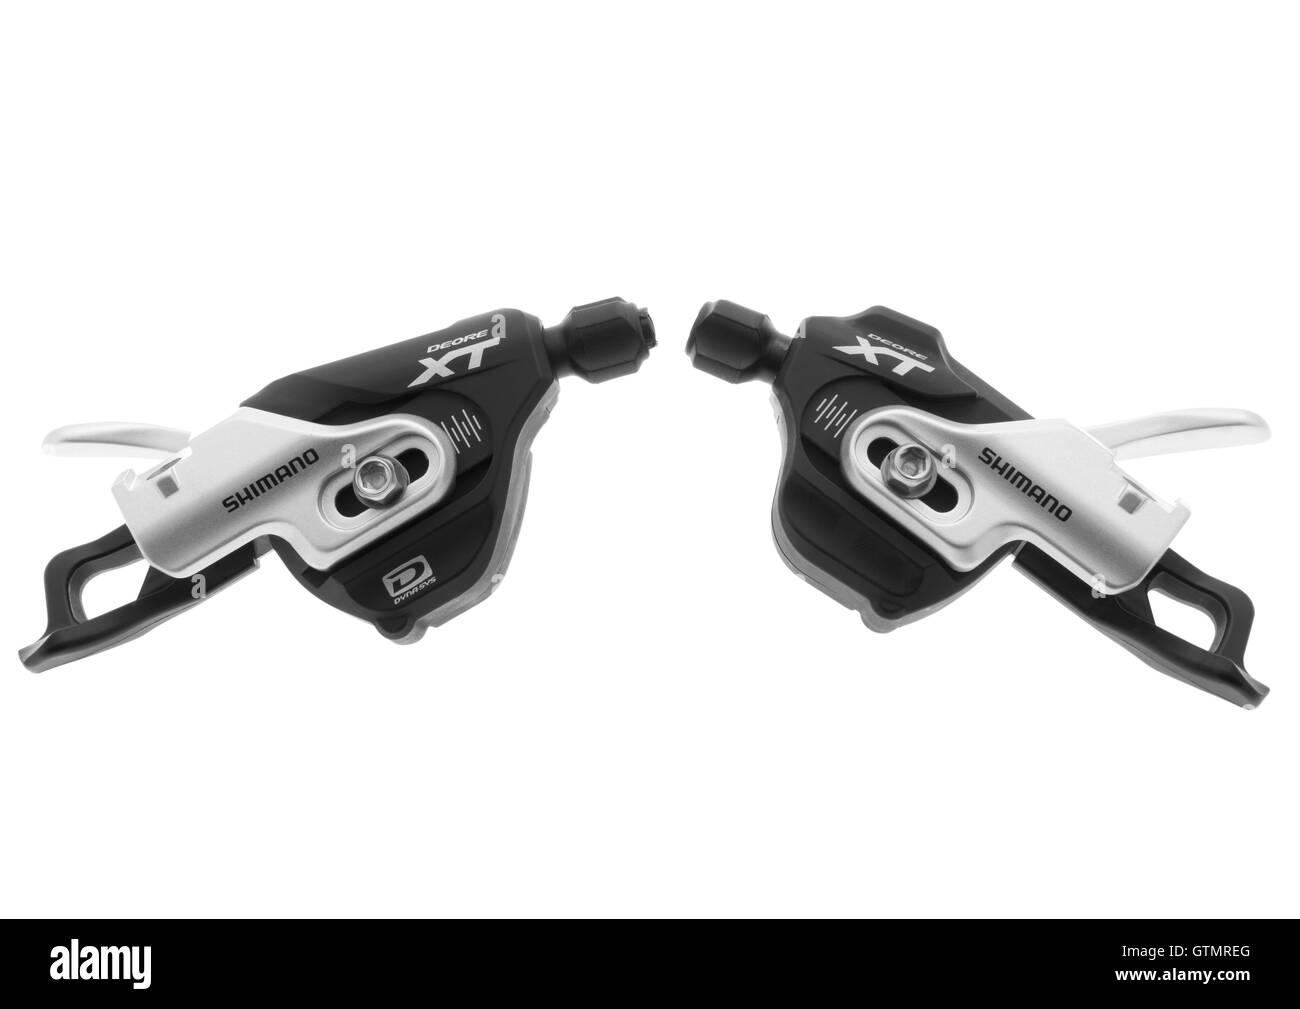 Shimano XT SL-M780B direct mount gear shifters on white background Stock Photo